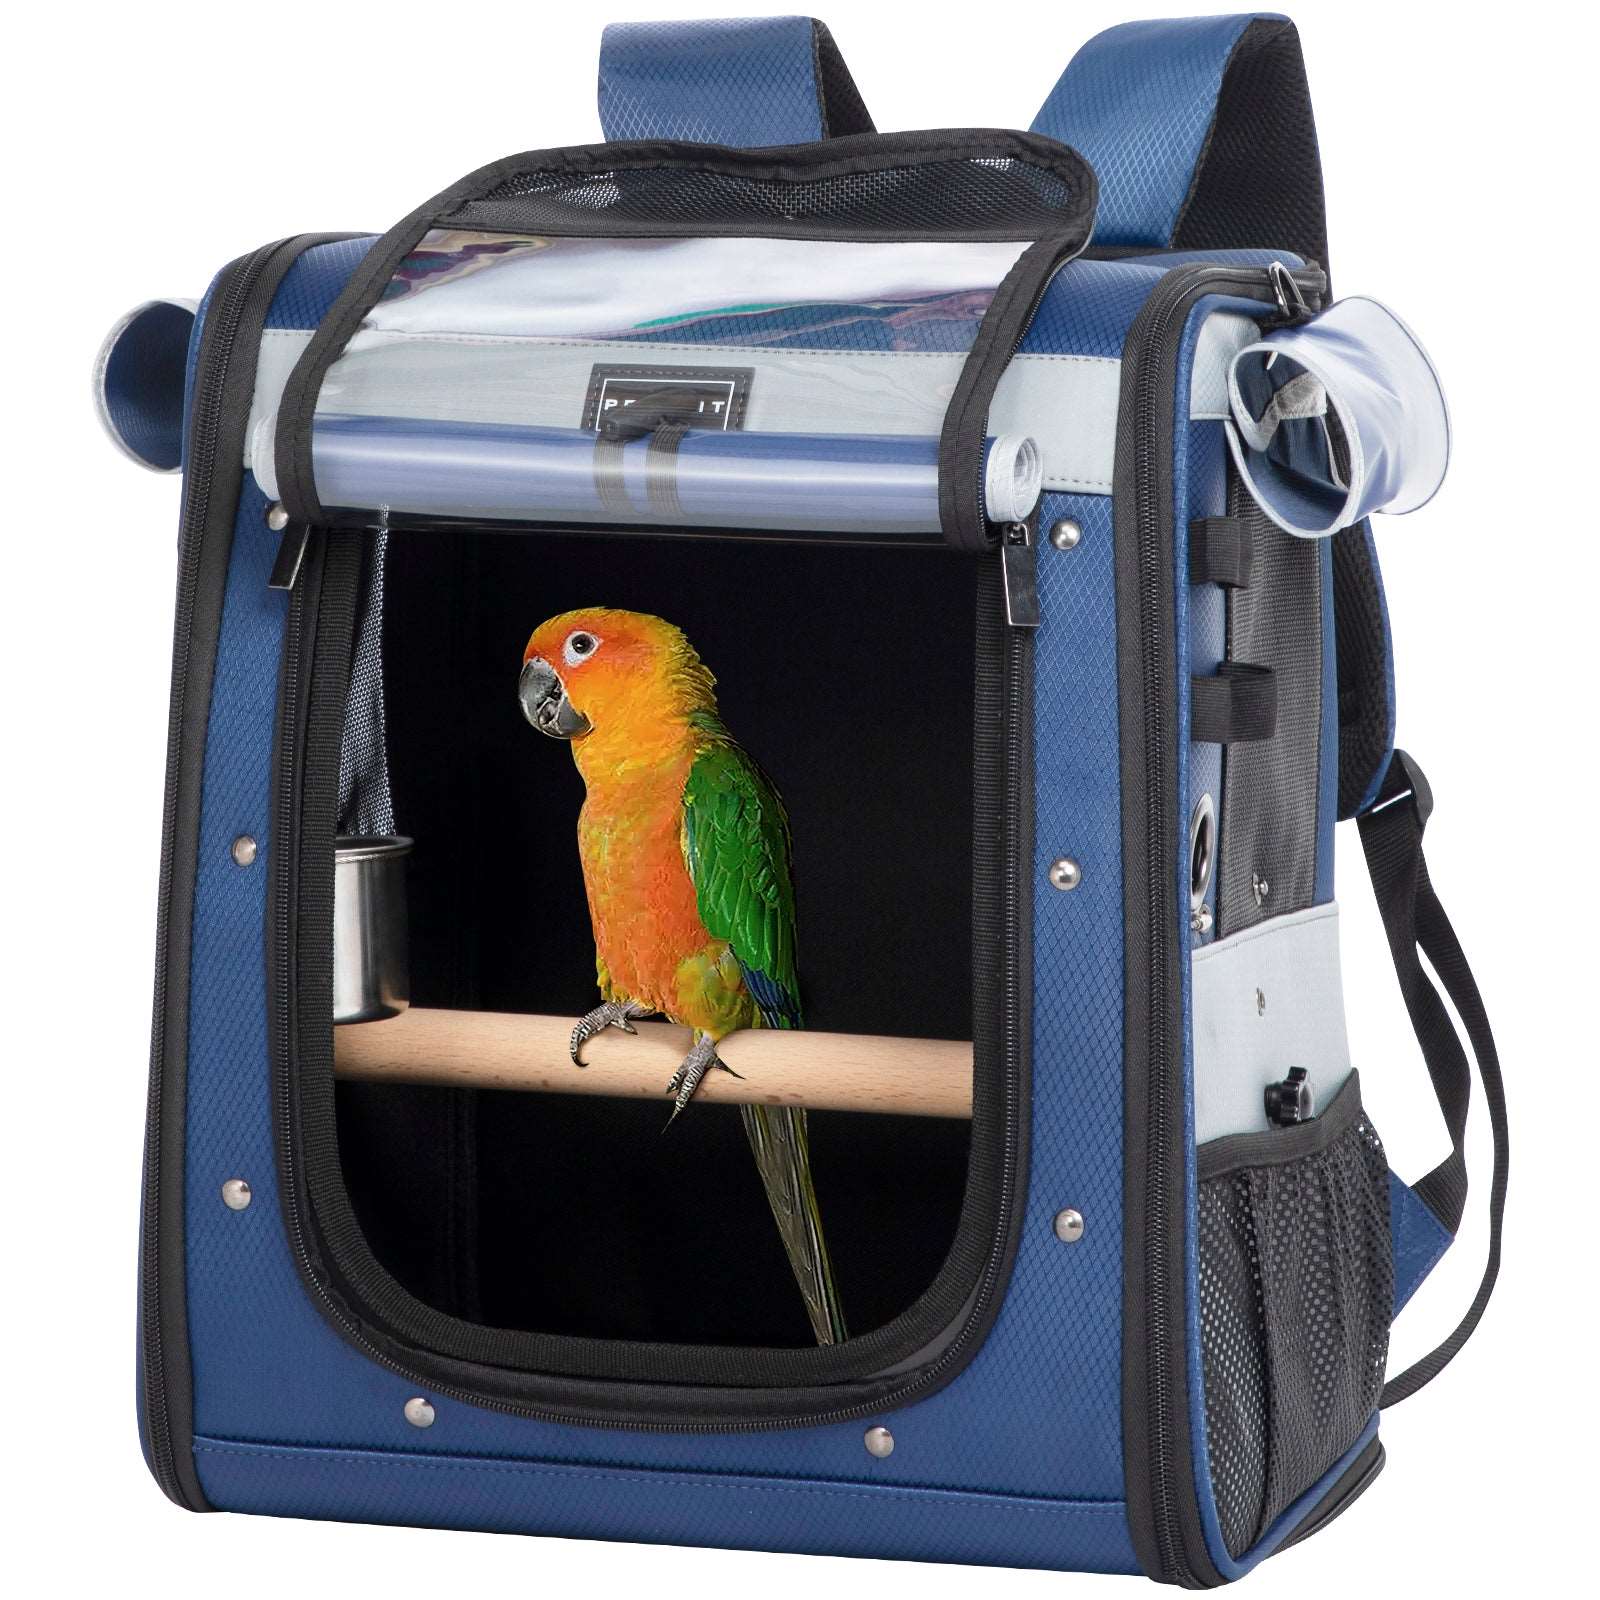 Petsfit-Bird-Carrier-with-Shade-Cover-07